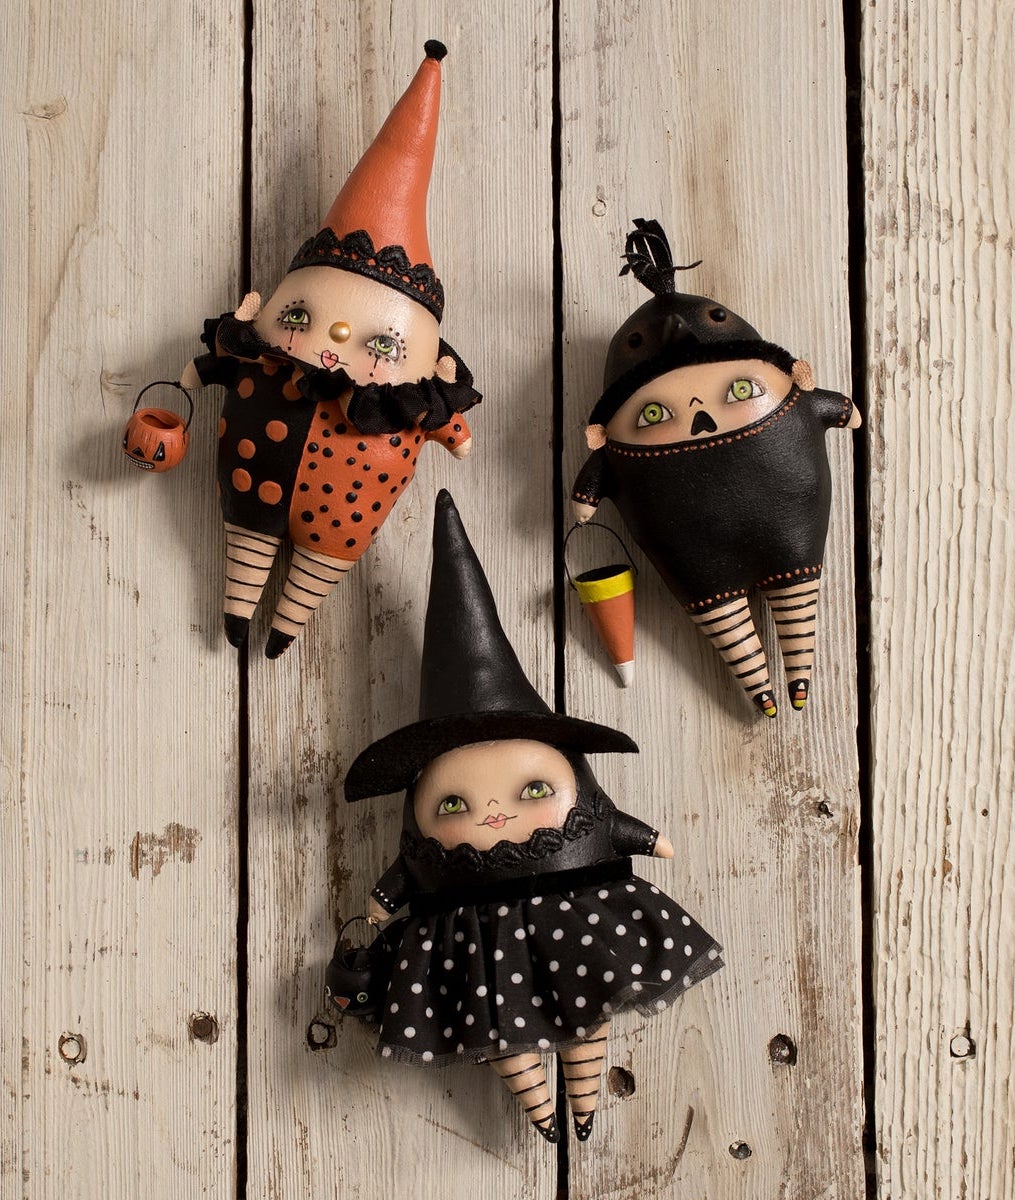 Cute Halloween decorations by Robin Seeber